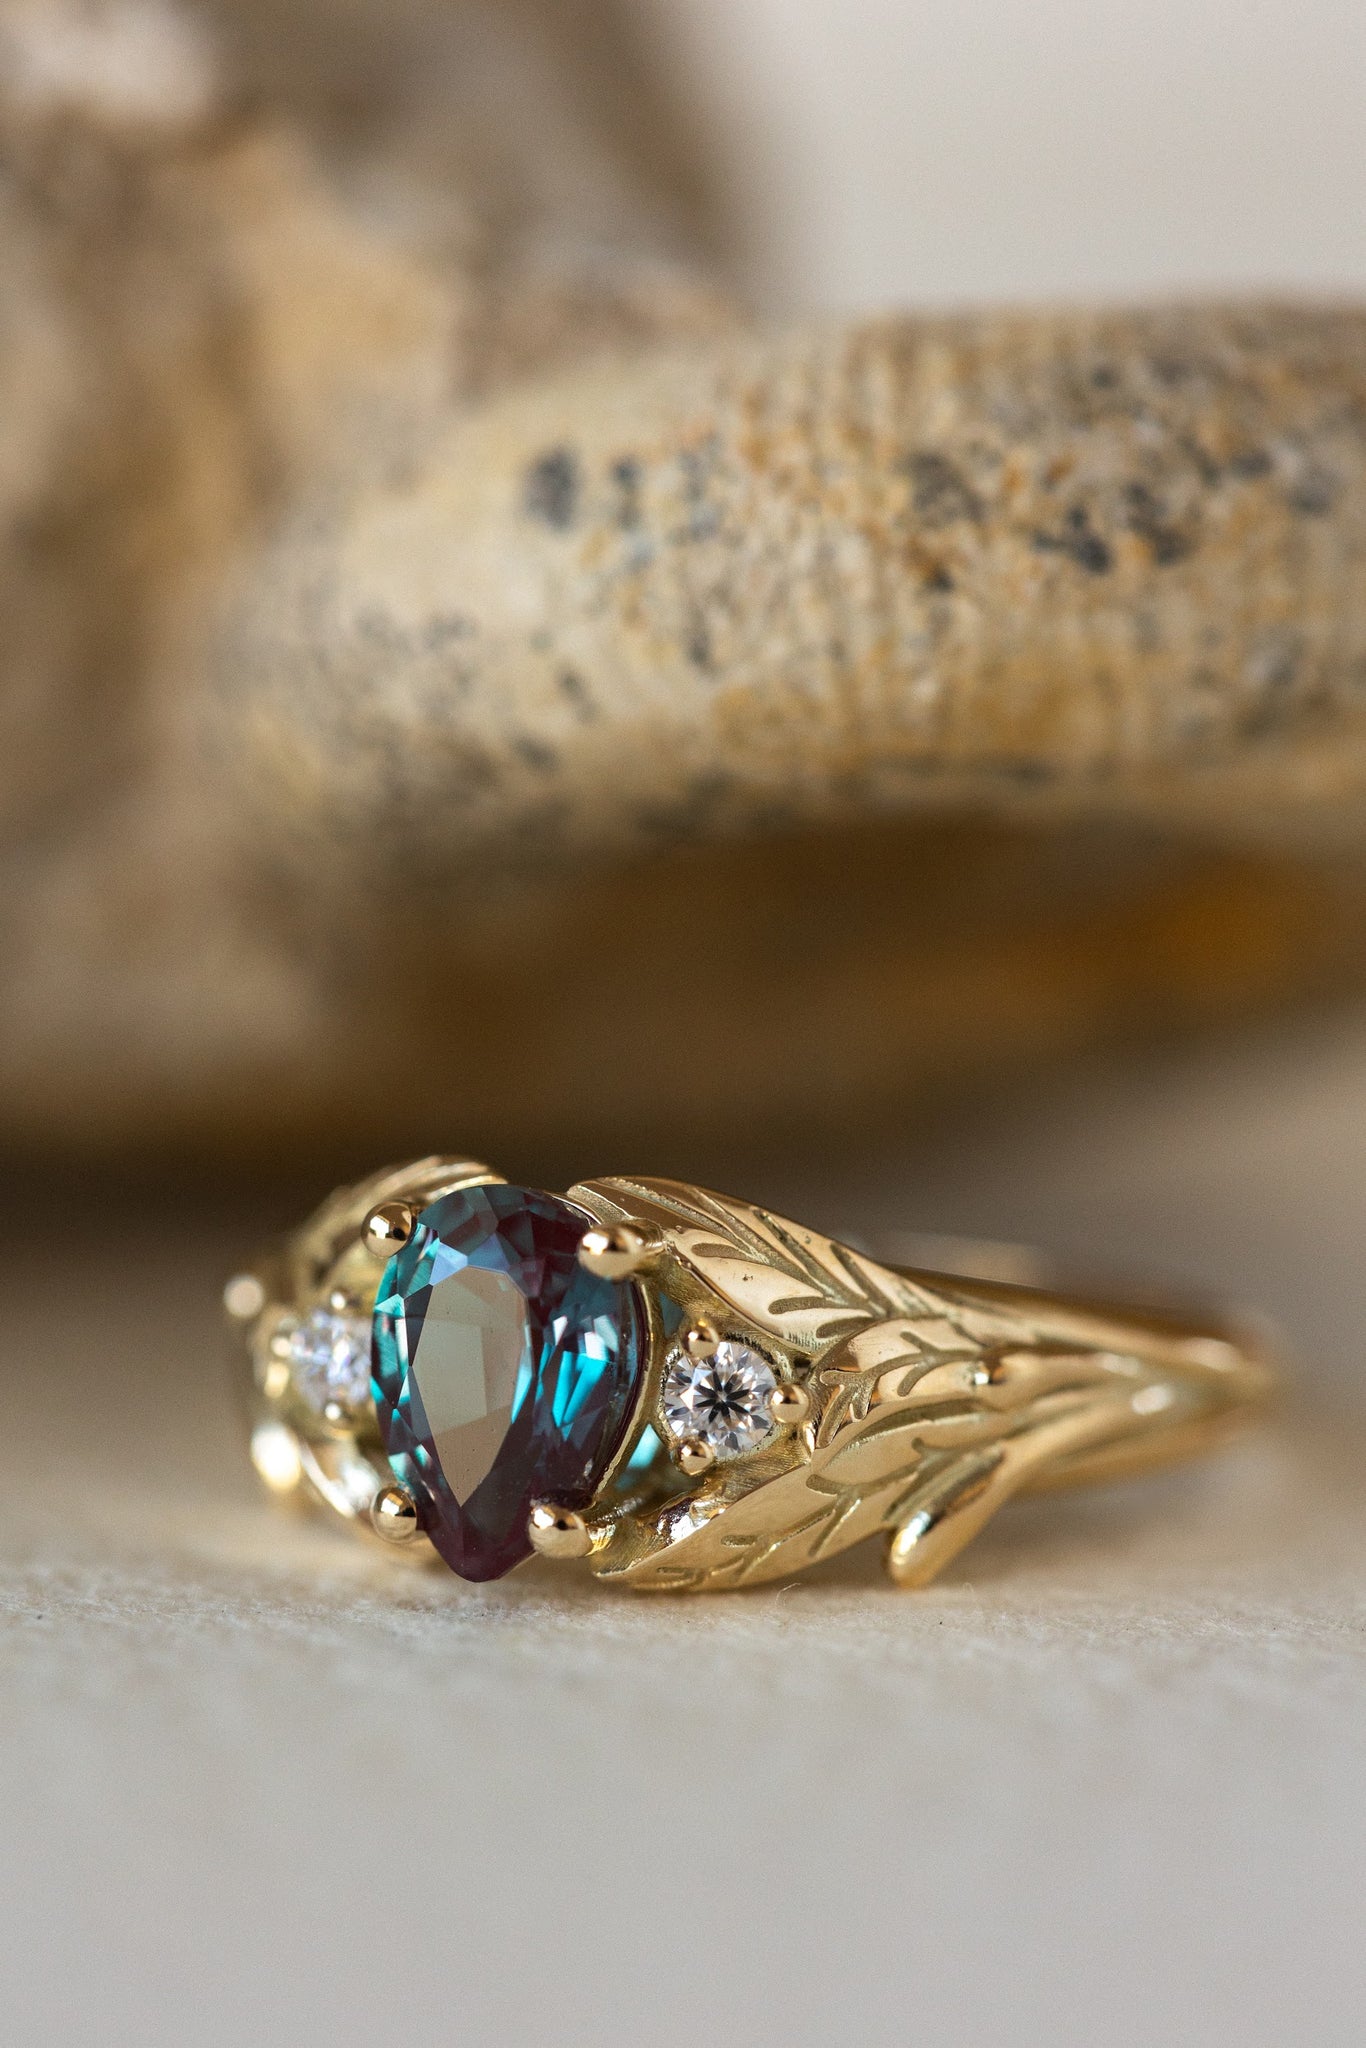 READY TO SHIP: Wisteria in 14K yellow gold, pear alexandrite 7x5 mm, moissanites, RING SIZE 4.5-6.5US - Eden Garden Jewelry™